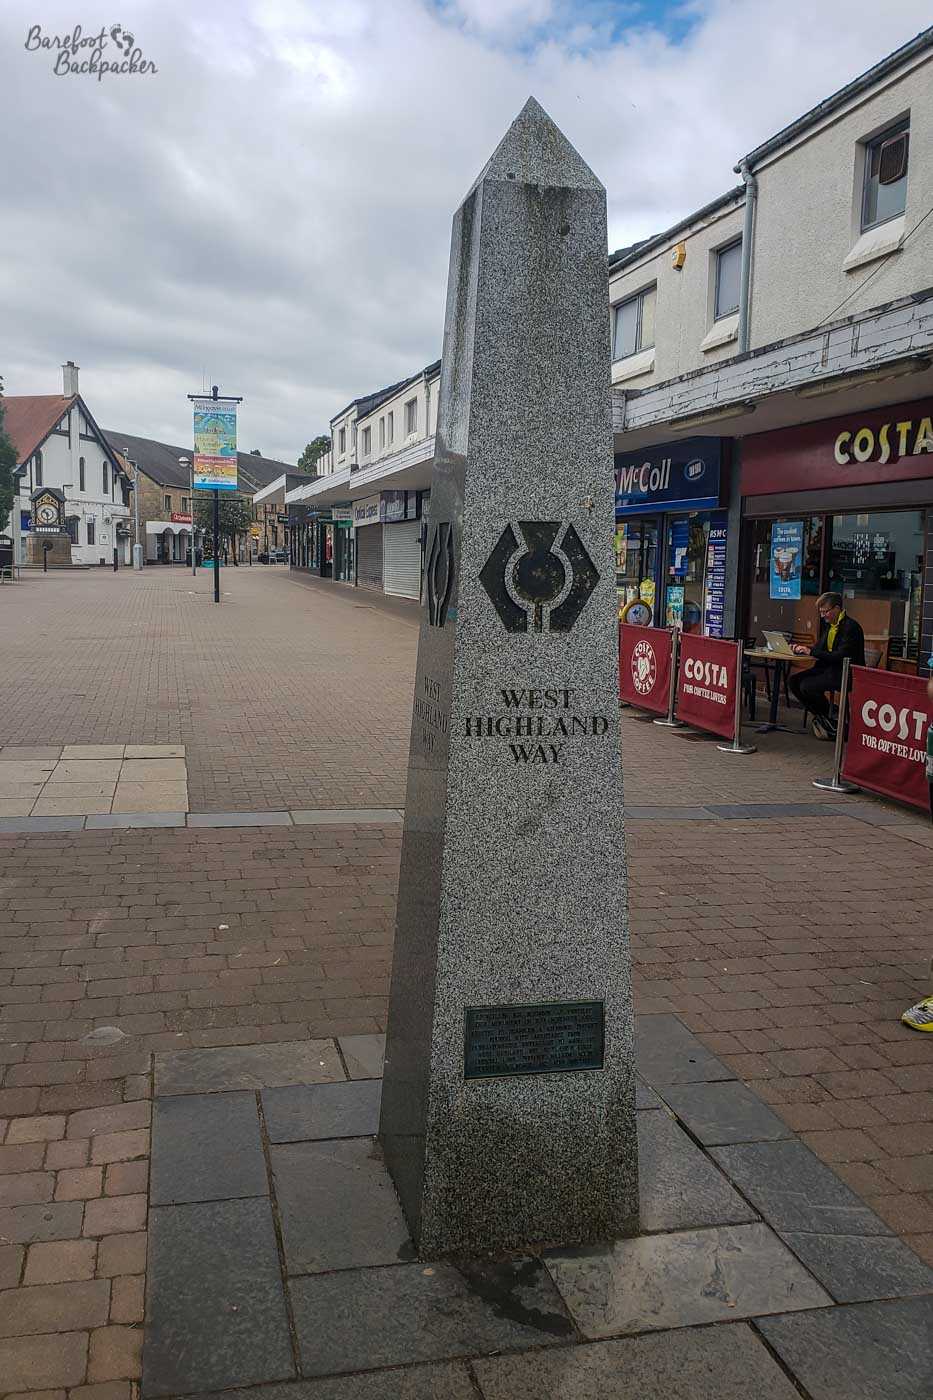 A stone obelisk, saying West Highland Way, stands on the pedestrianised high street, with shops to the right.